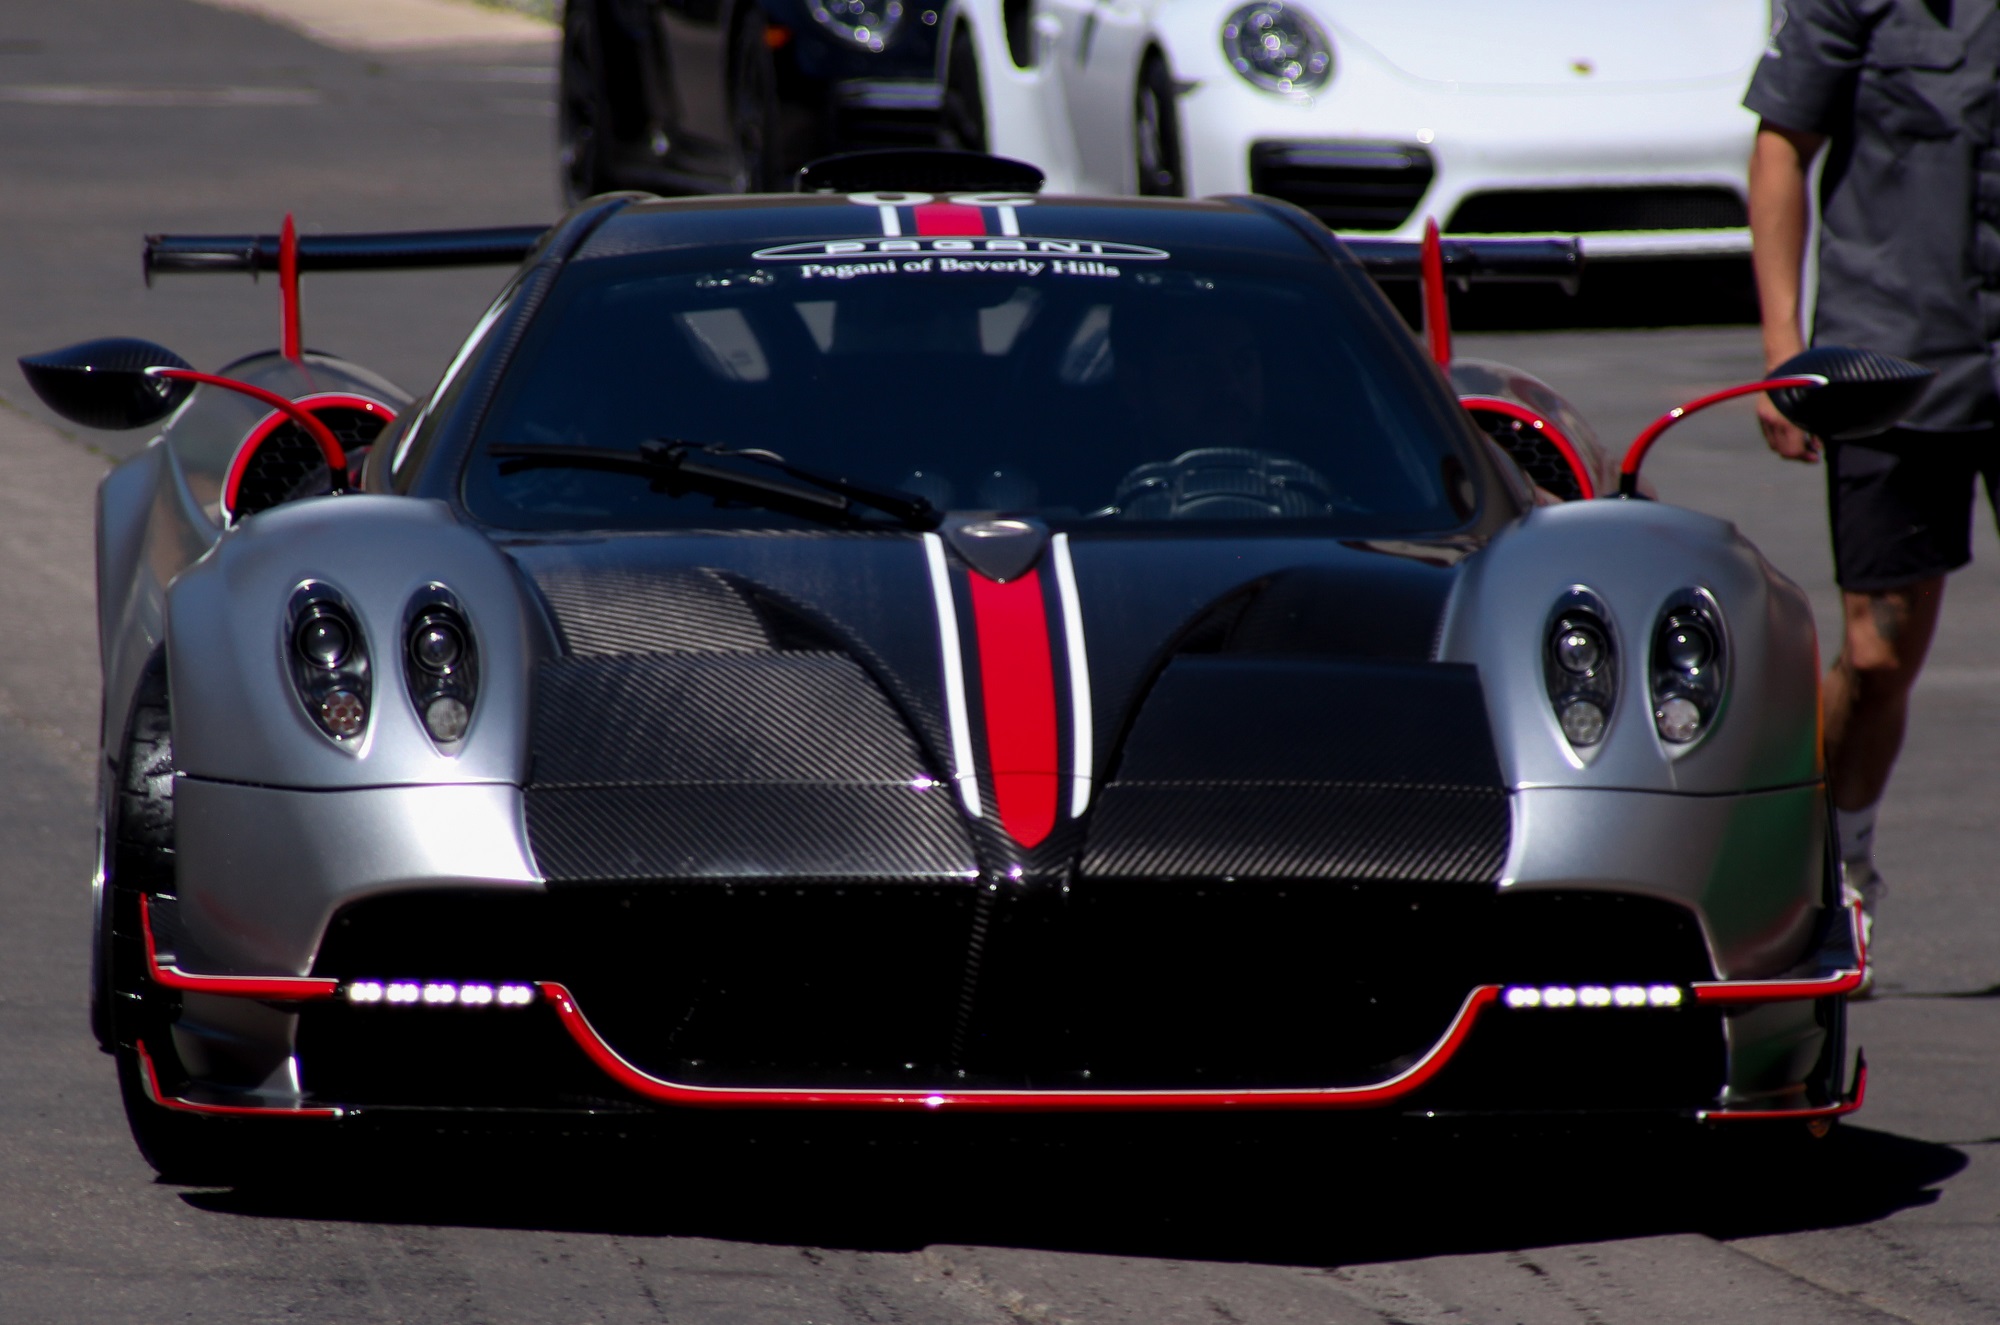 A Pagani is always a attention-grabbing supercar.